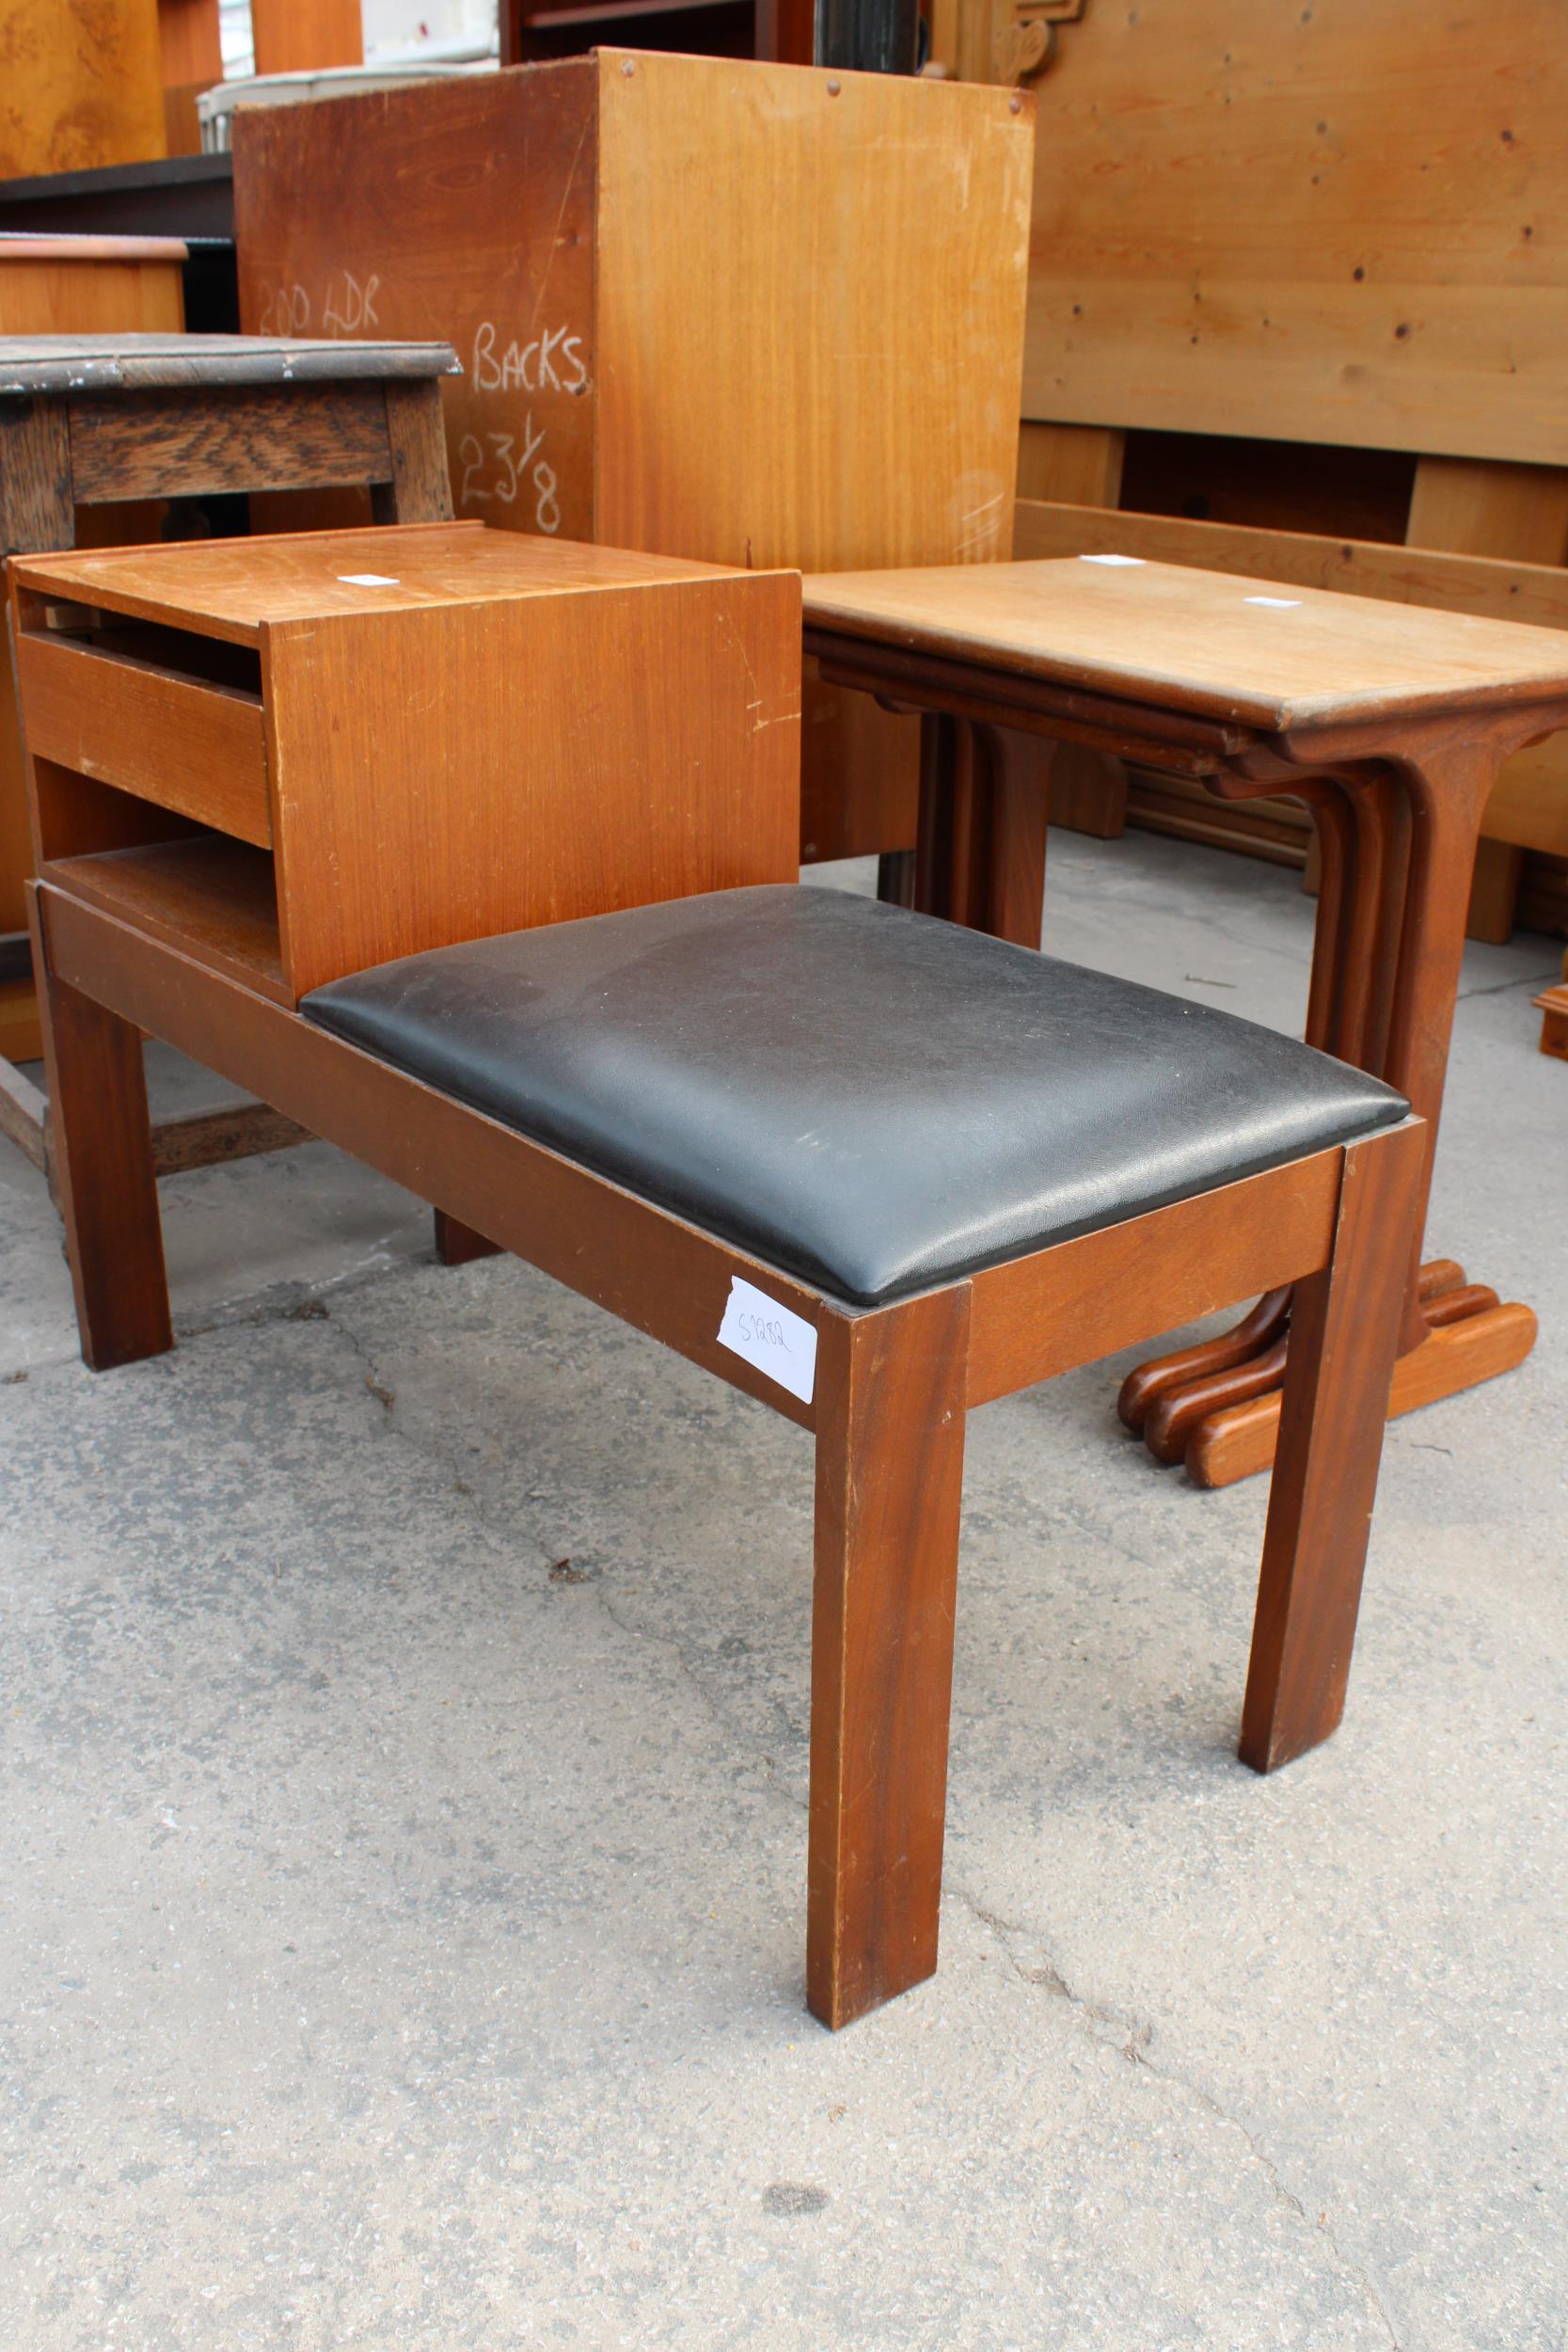 A RETRO TEAK CHIPPY TELEPHONE TABLE/SEAT - Image 2 of 3